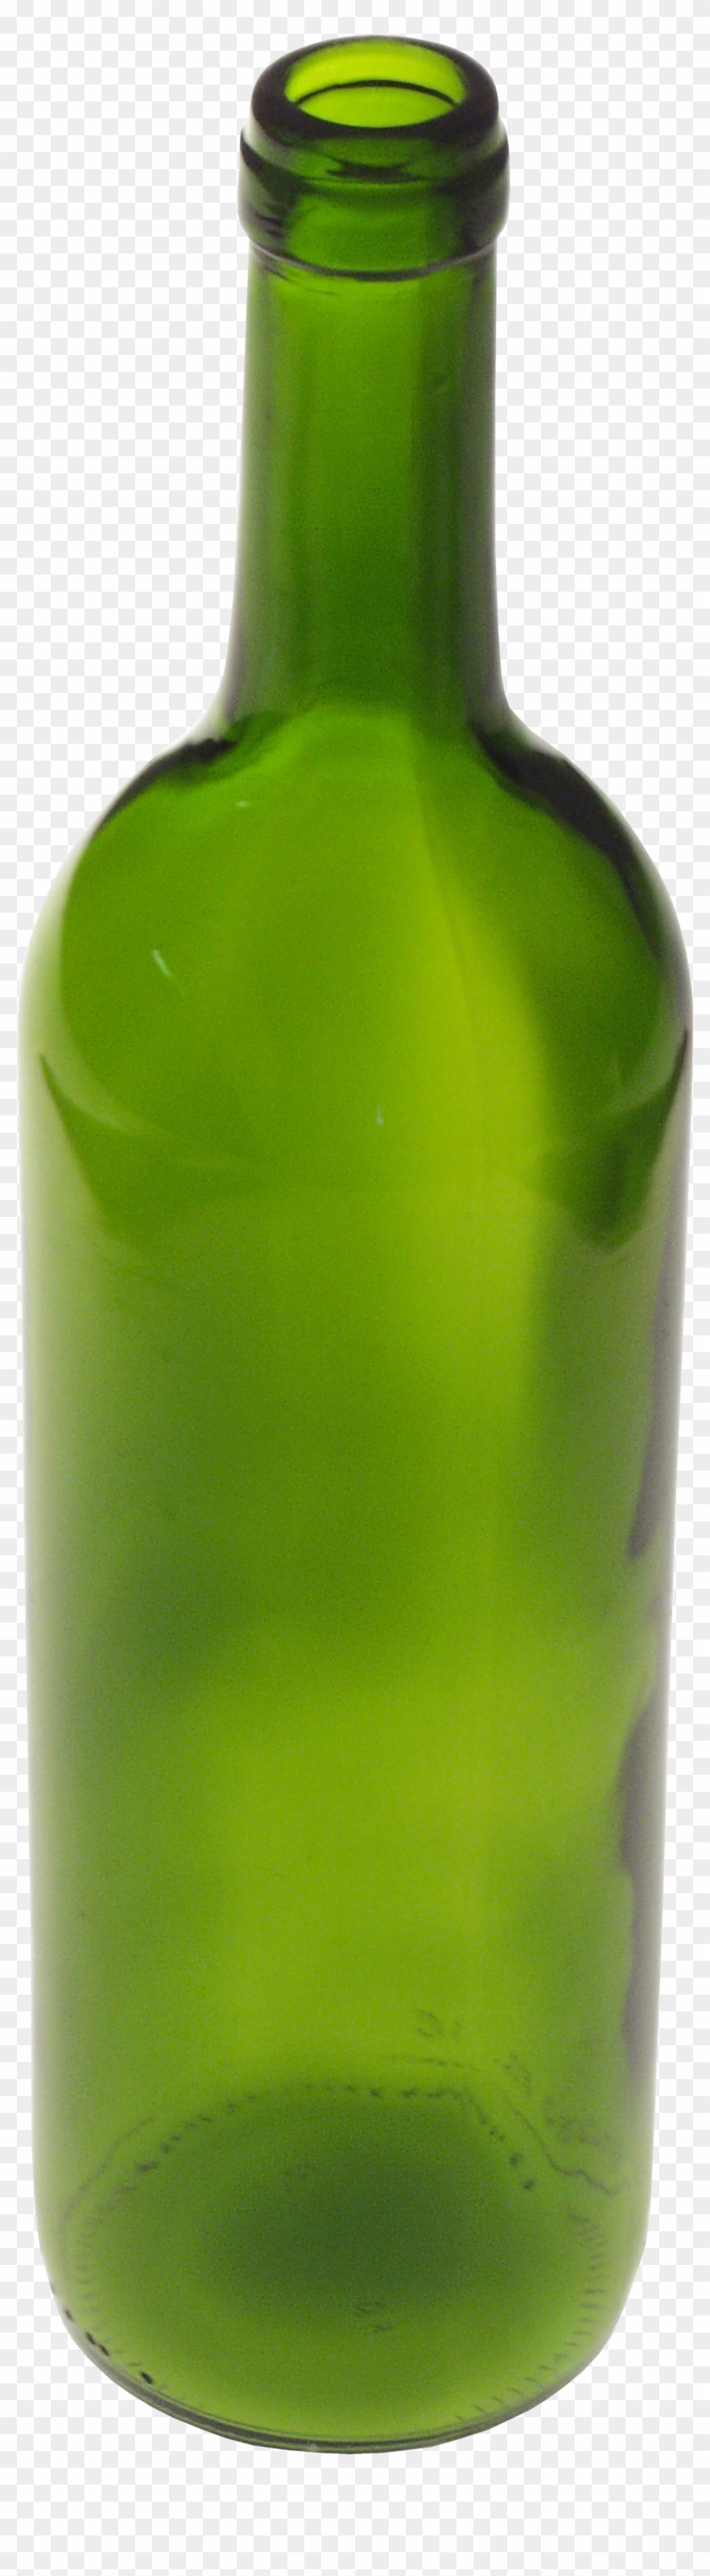 Container Clipart Glass Bottle - Green Bottle Png #391213